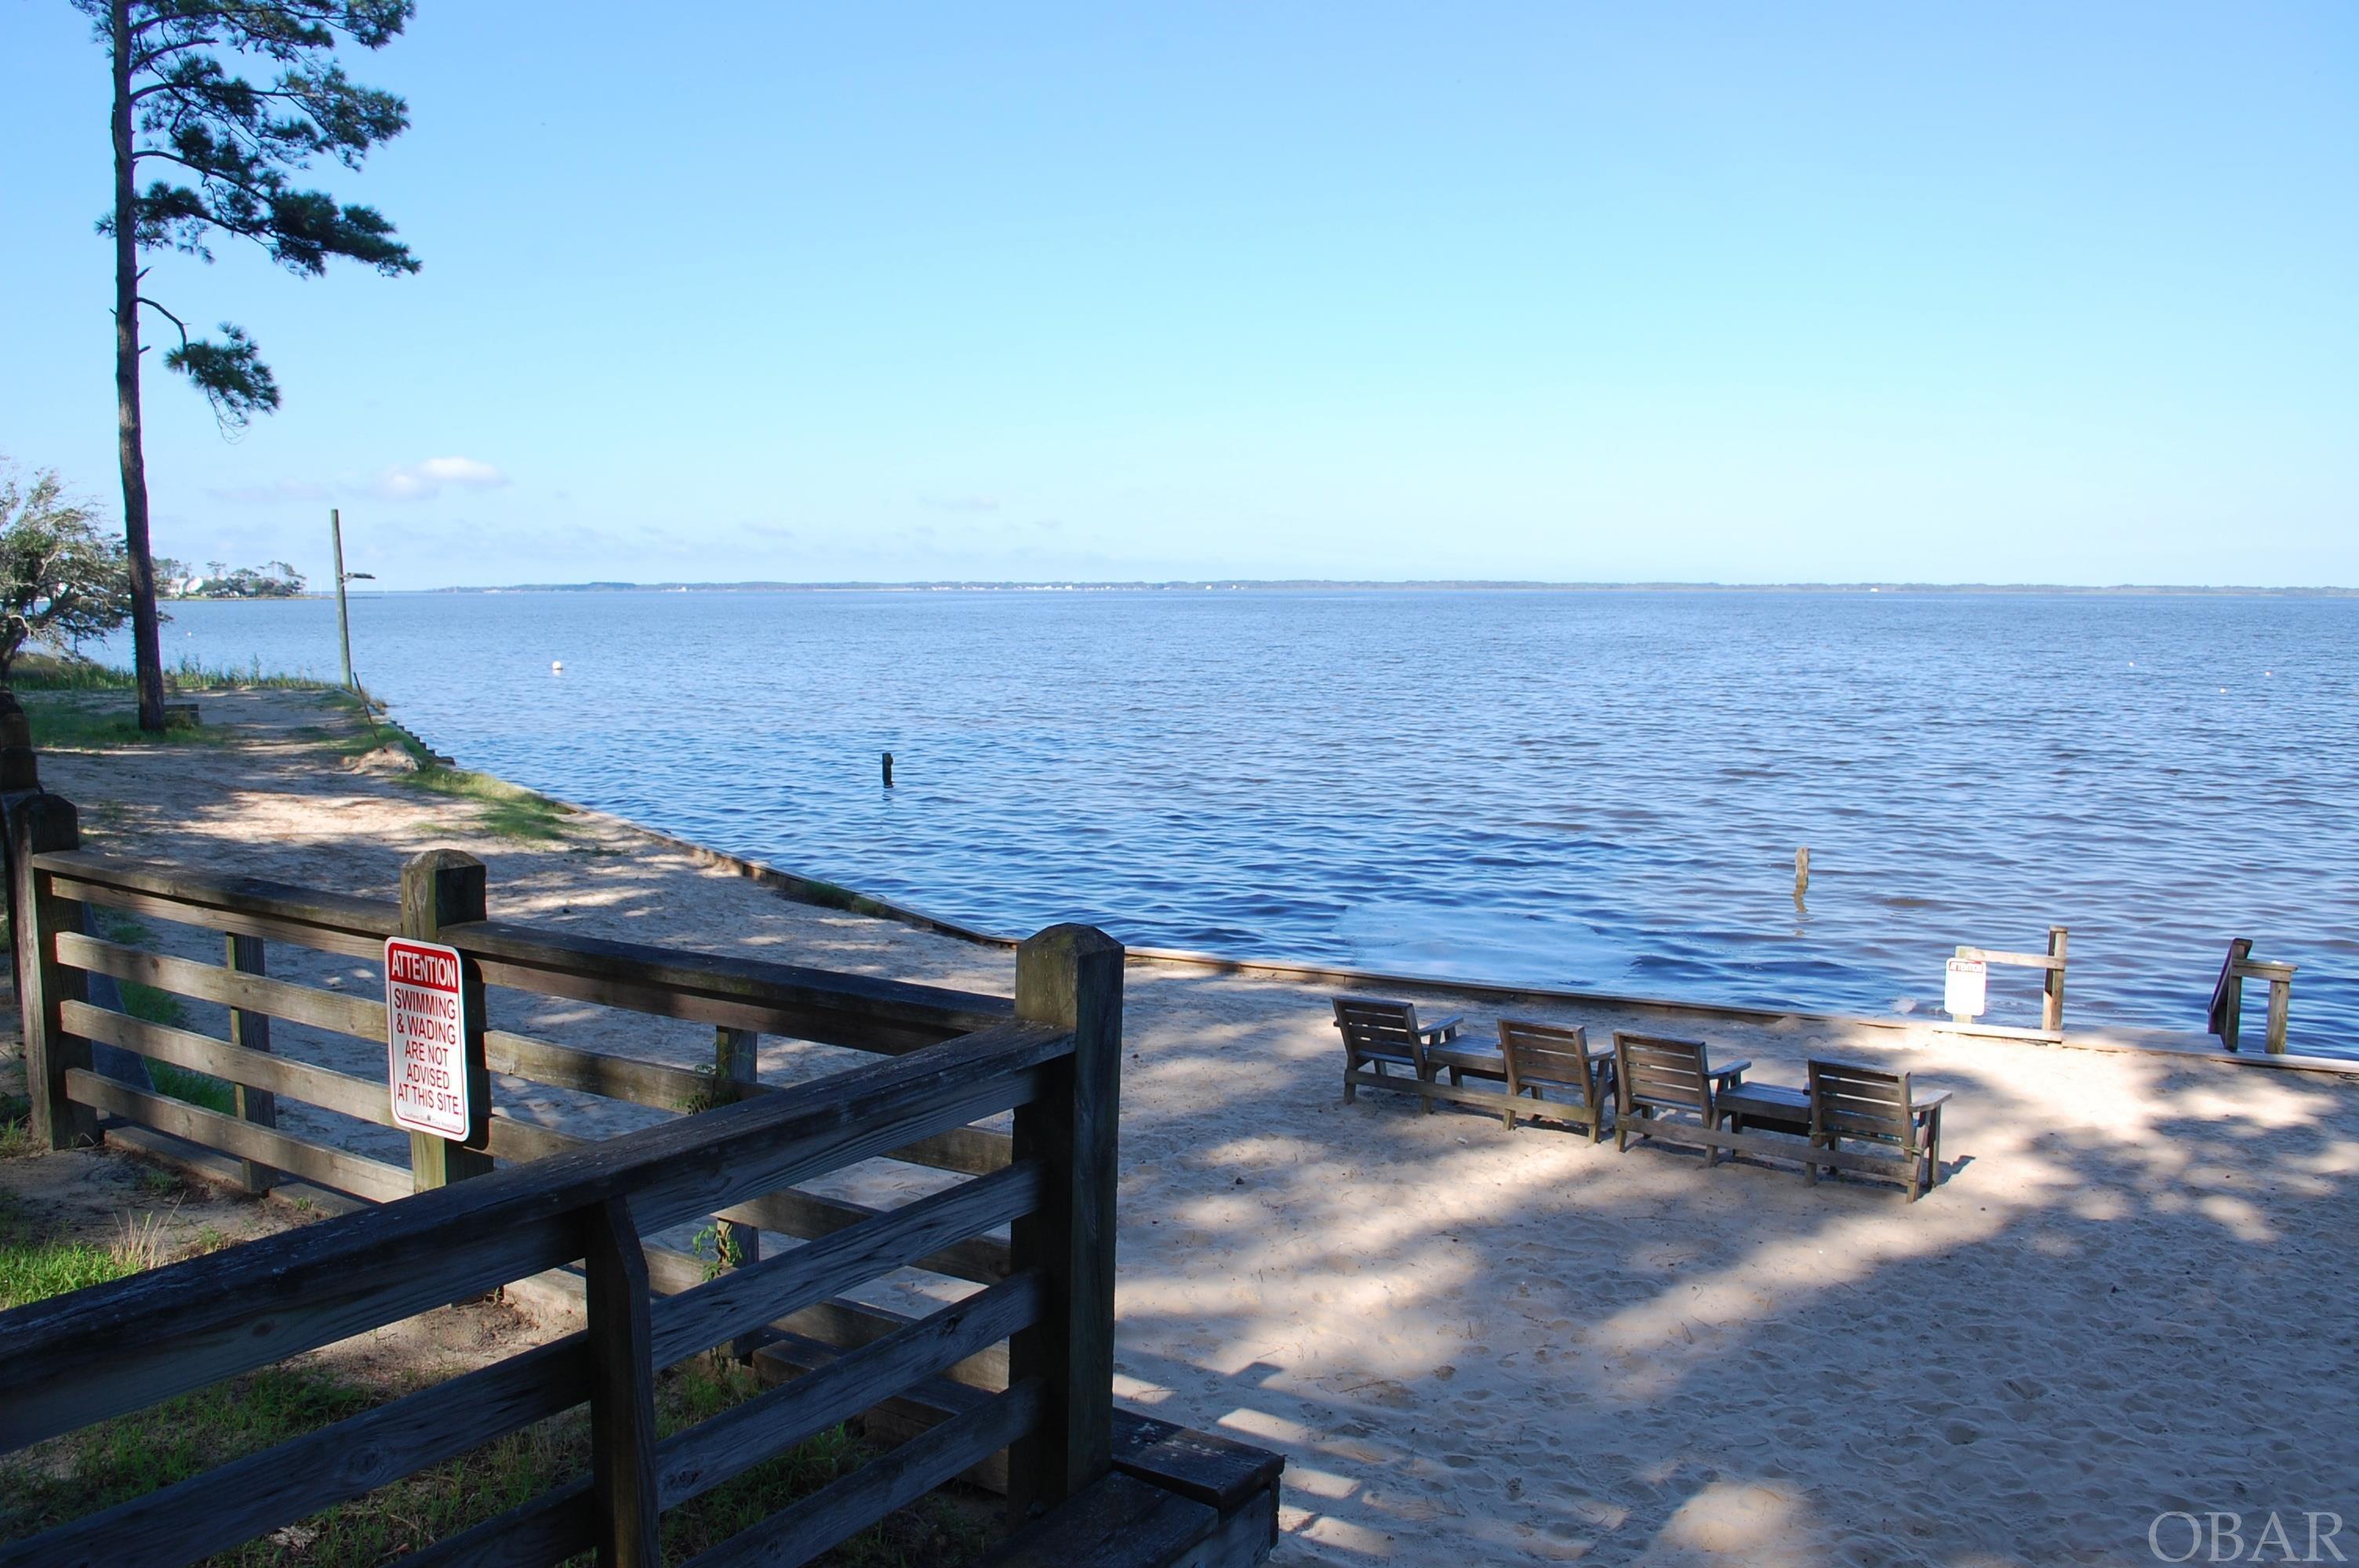 Southern Shores, North Carolina 27949, ,Residential,For sale,Dogwood Trail,120550